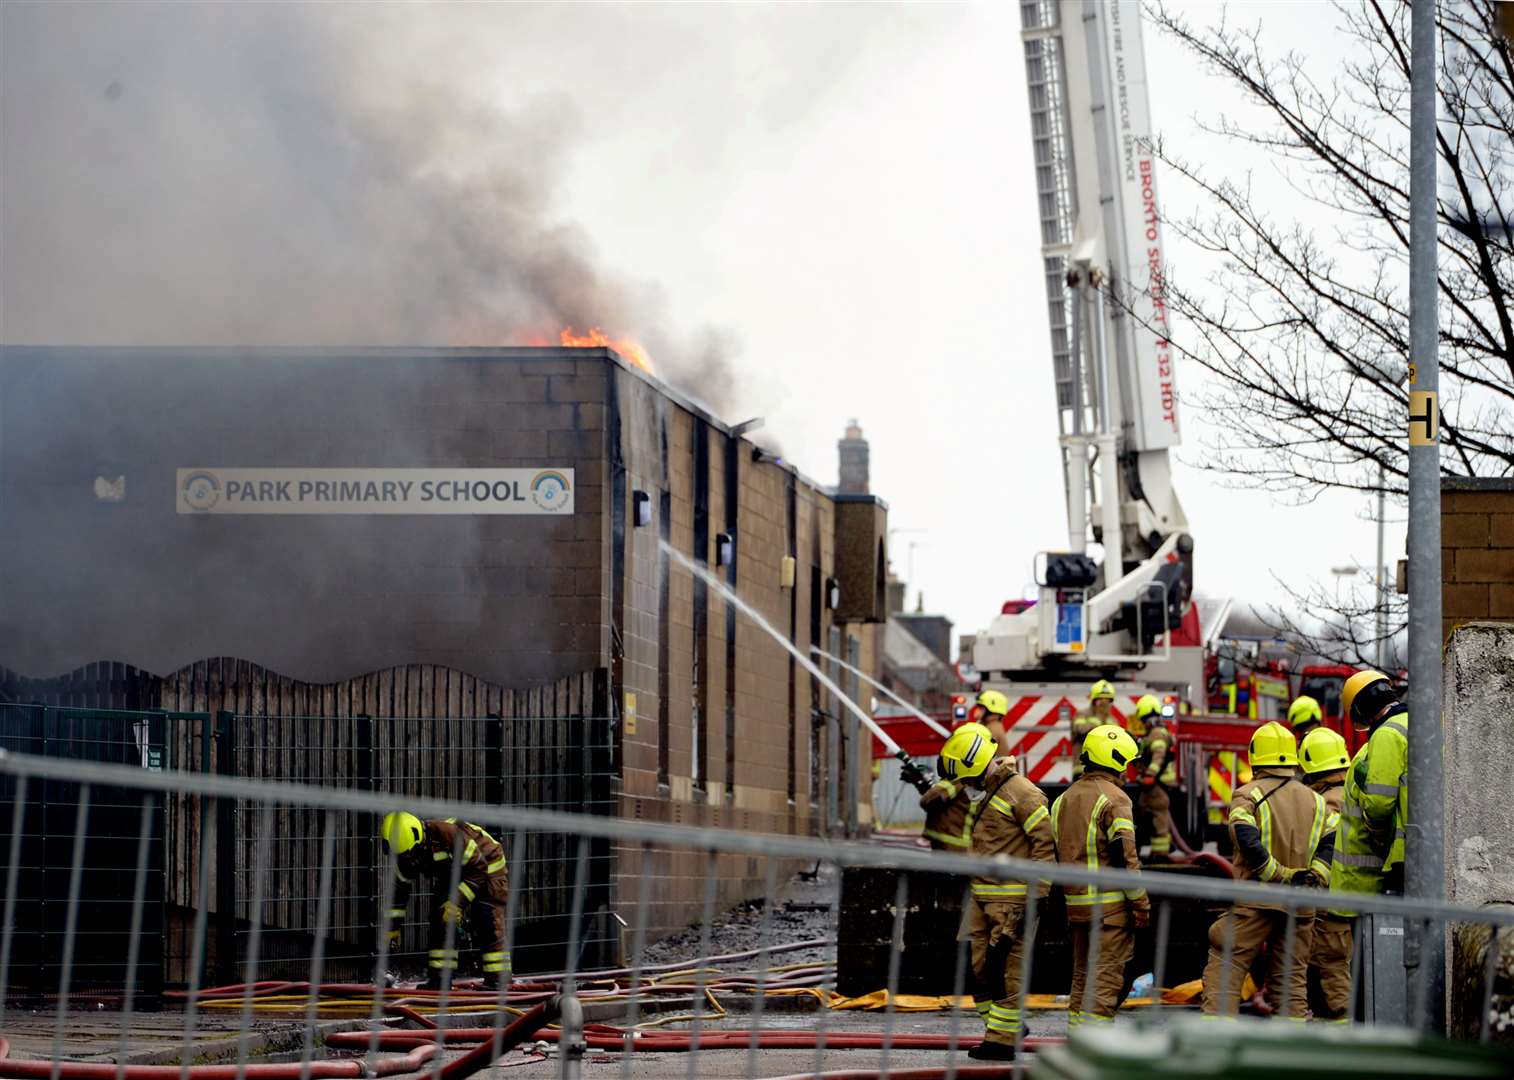 Firefighters dousing flames at Park Primary School. Picture: James MacKenzie.